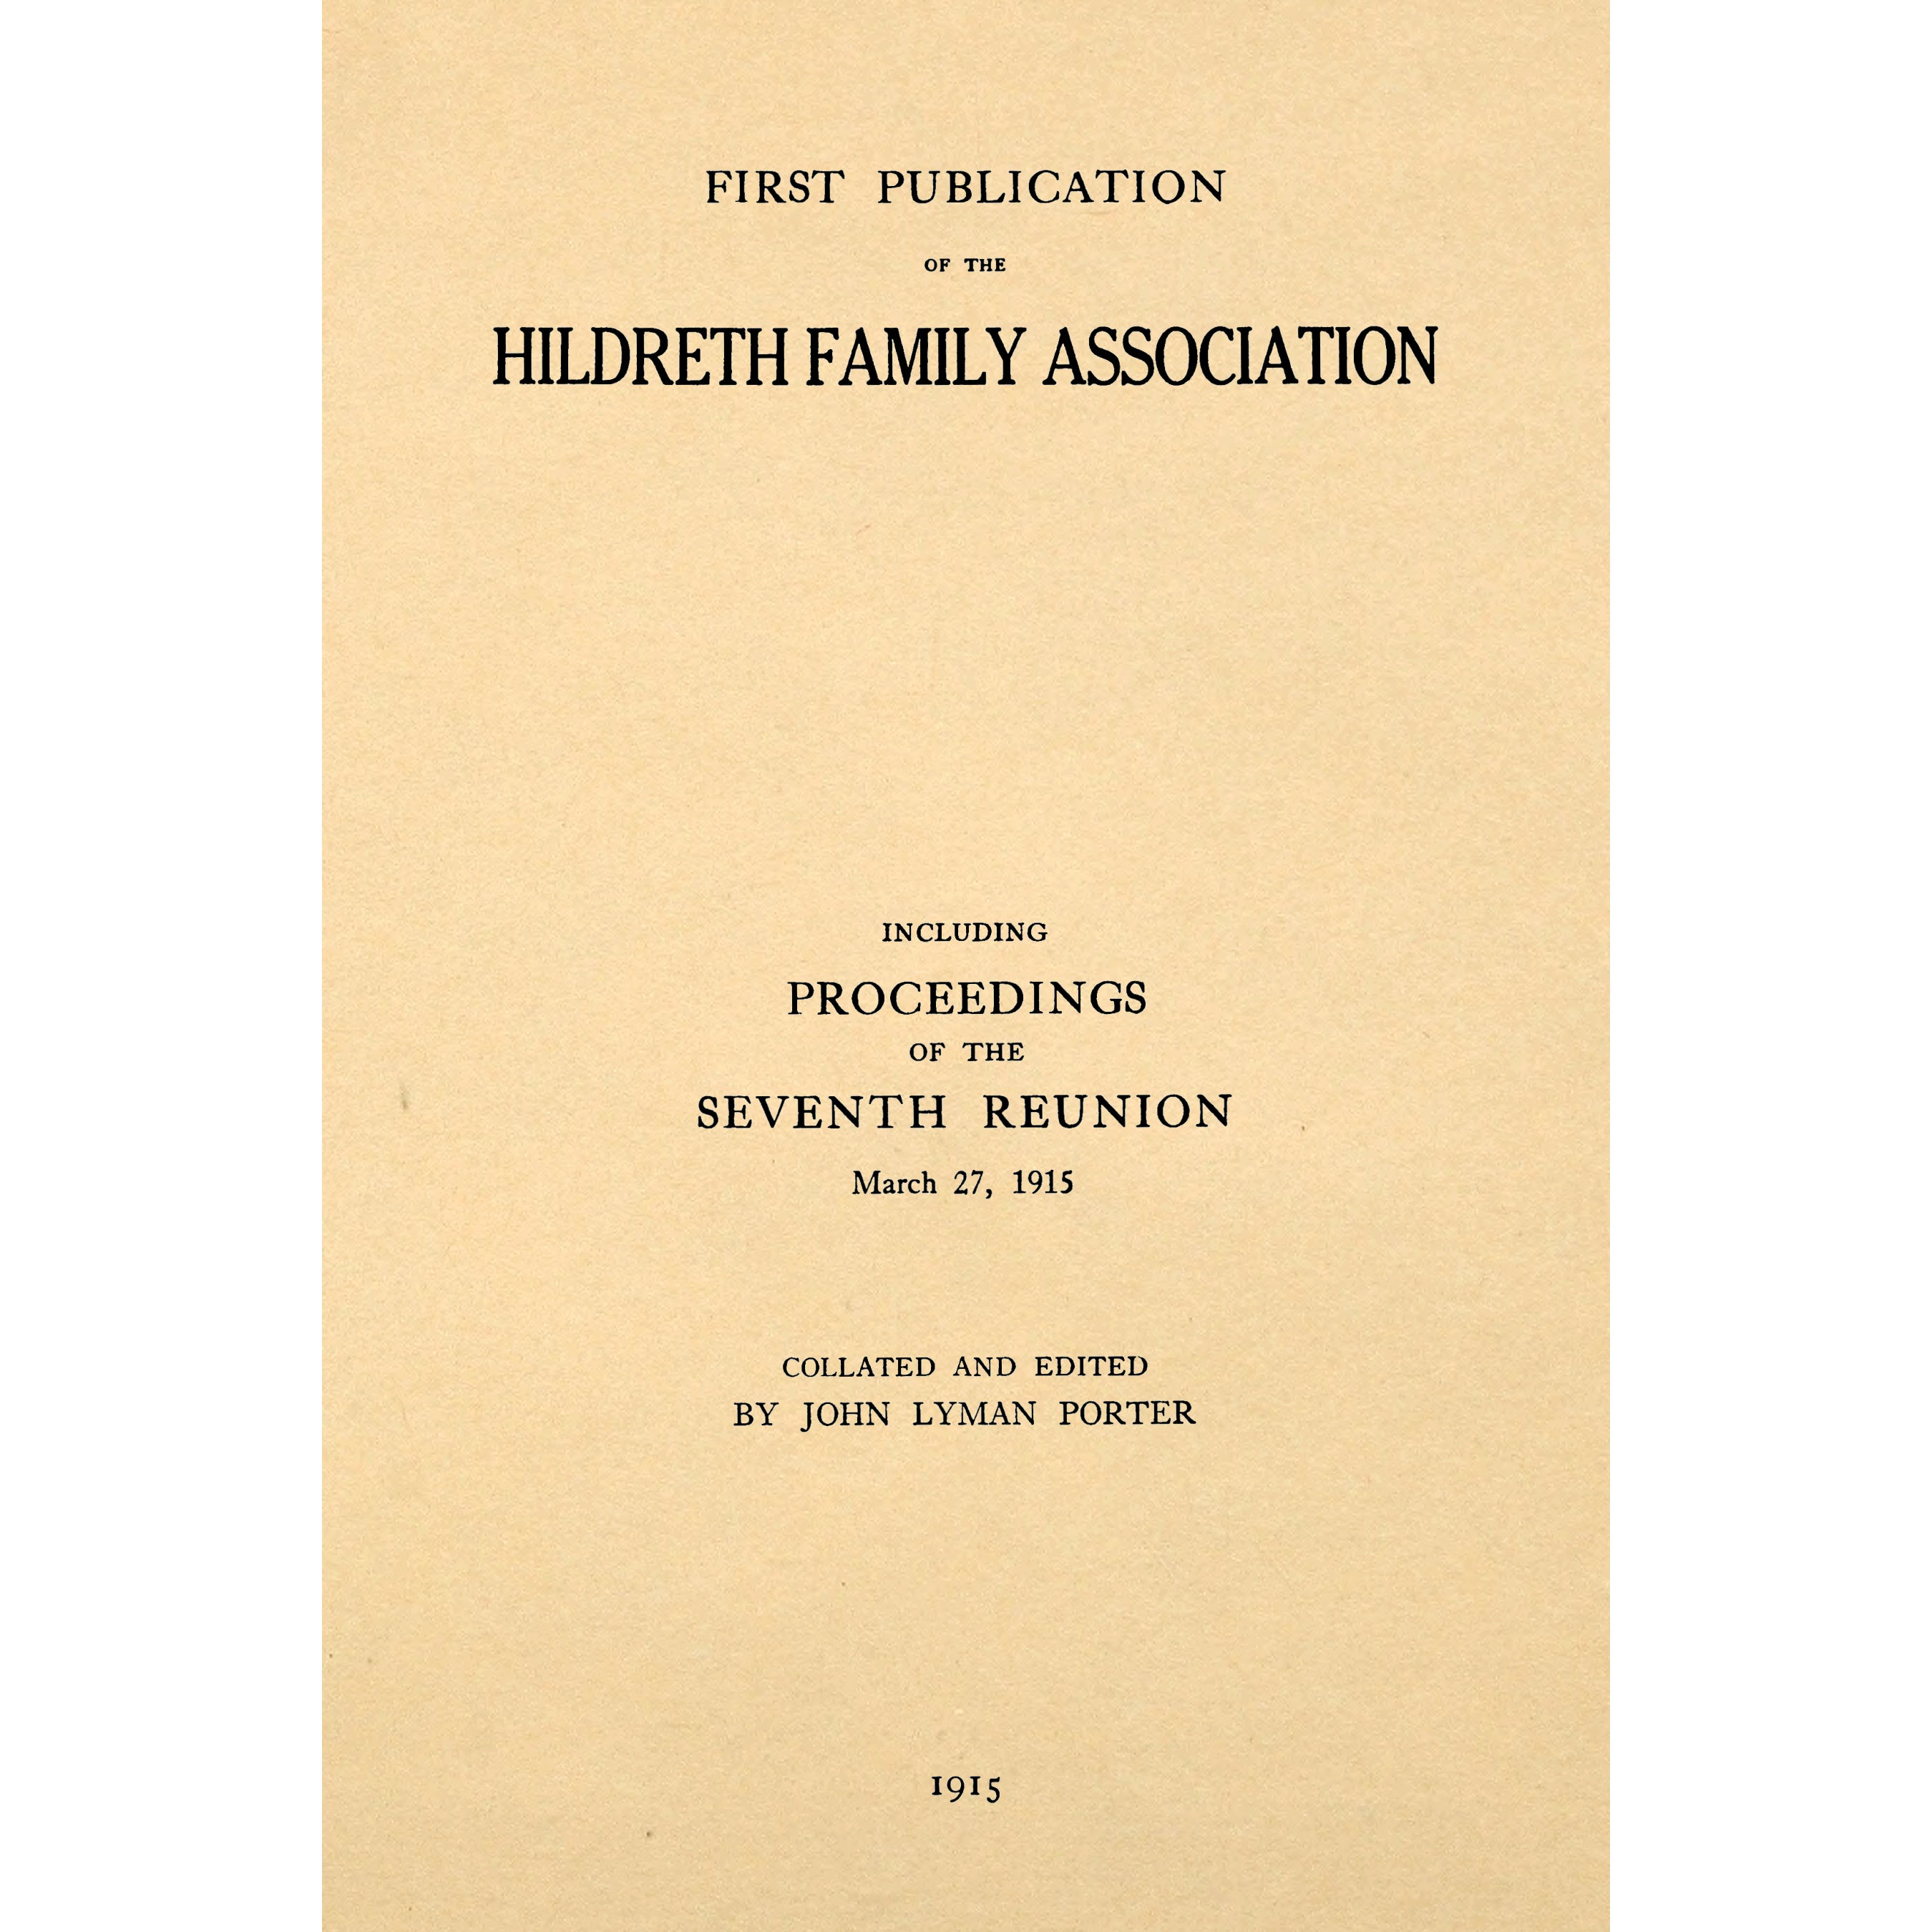 First publication of the Hildreth family association